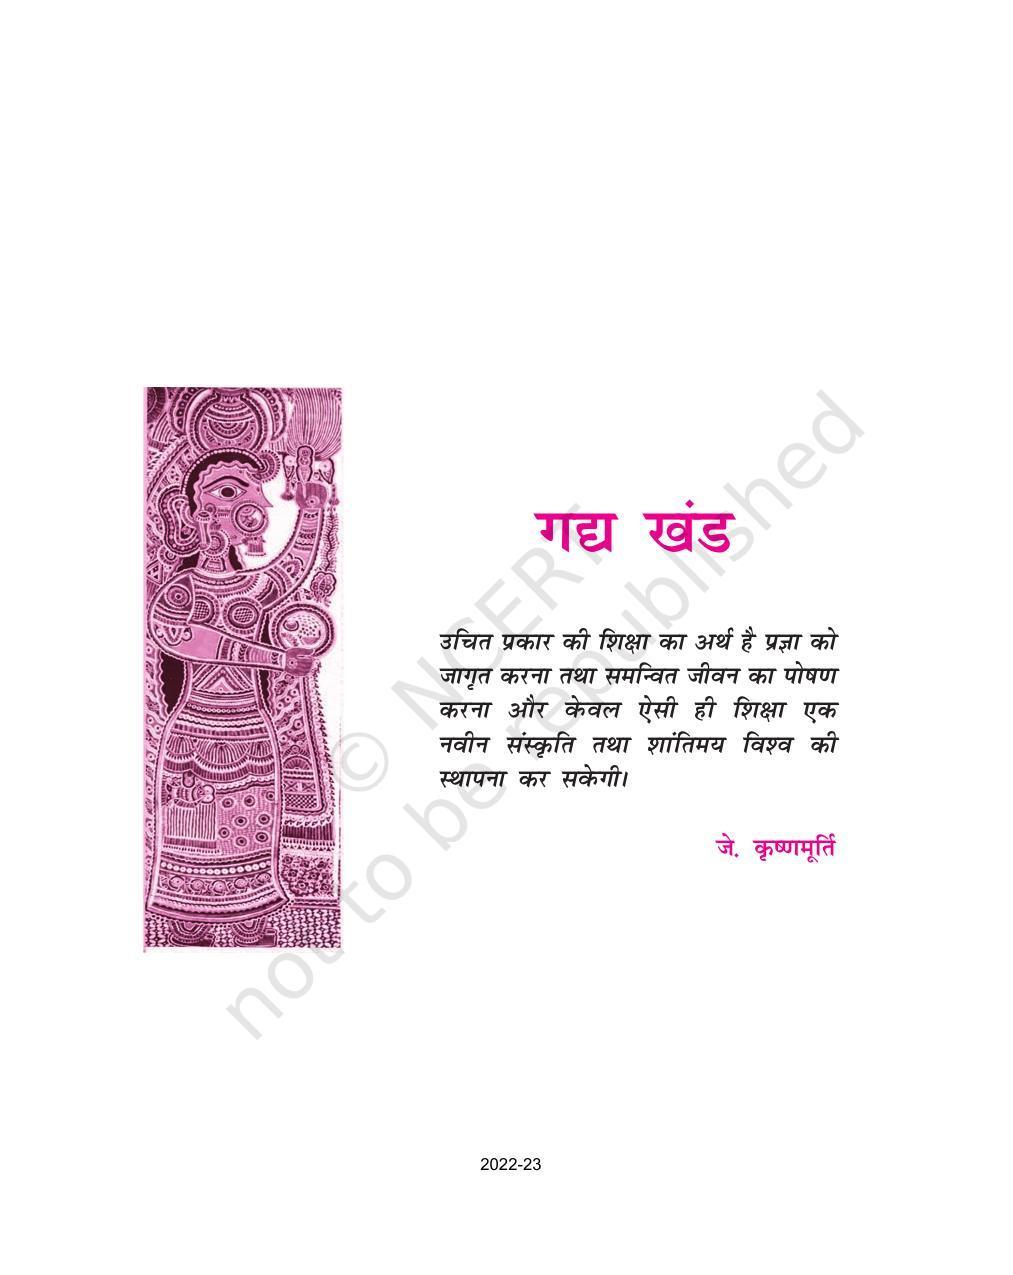 NCERT Book for Class 11 Hindi Aroh Chapter 1 नमक का दारोगा - Page 1